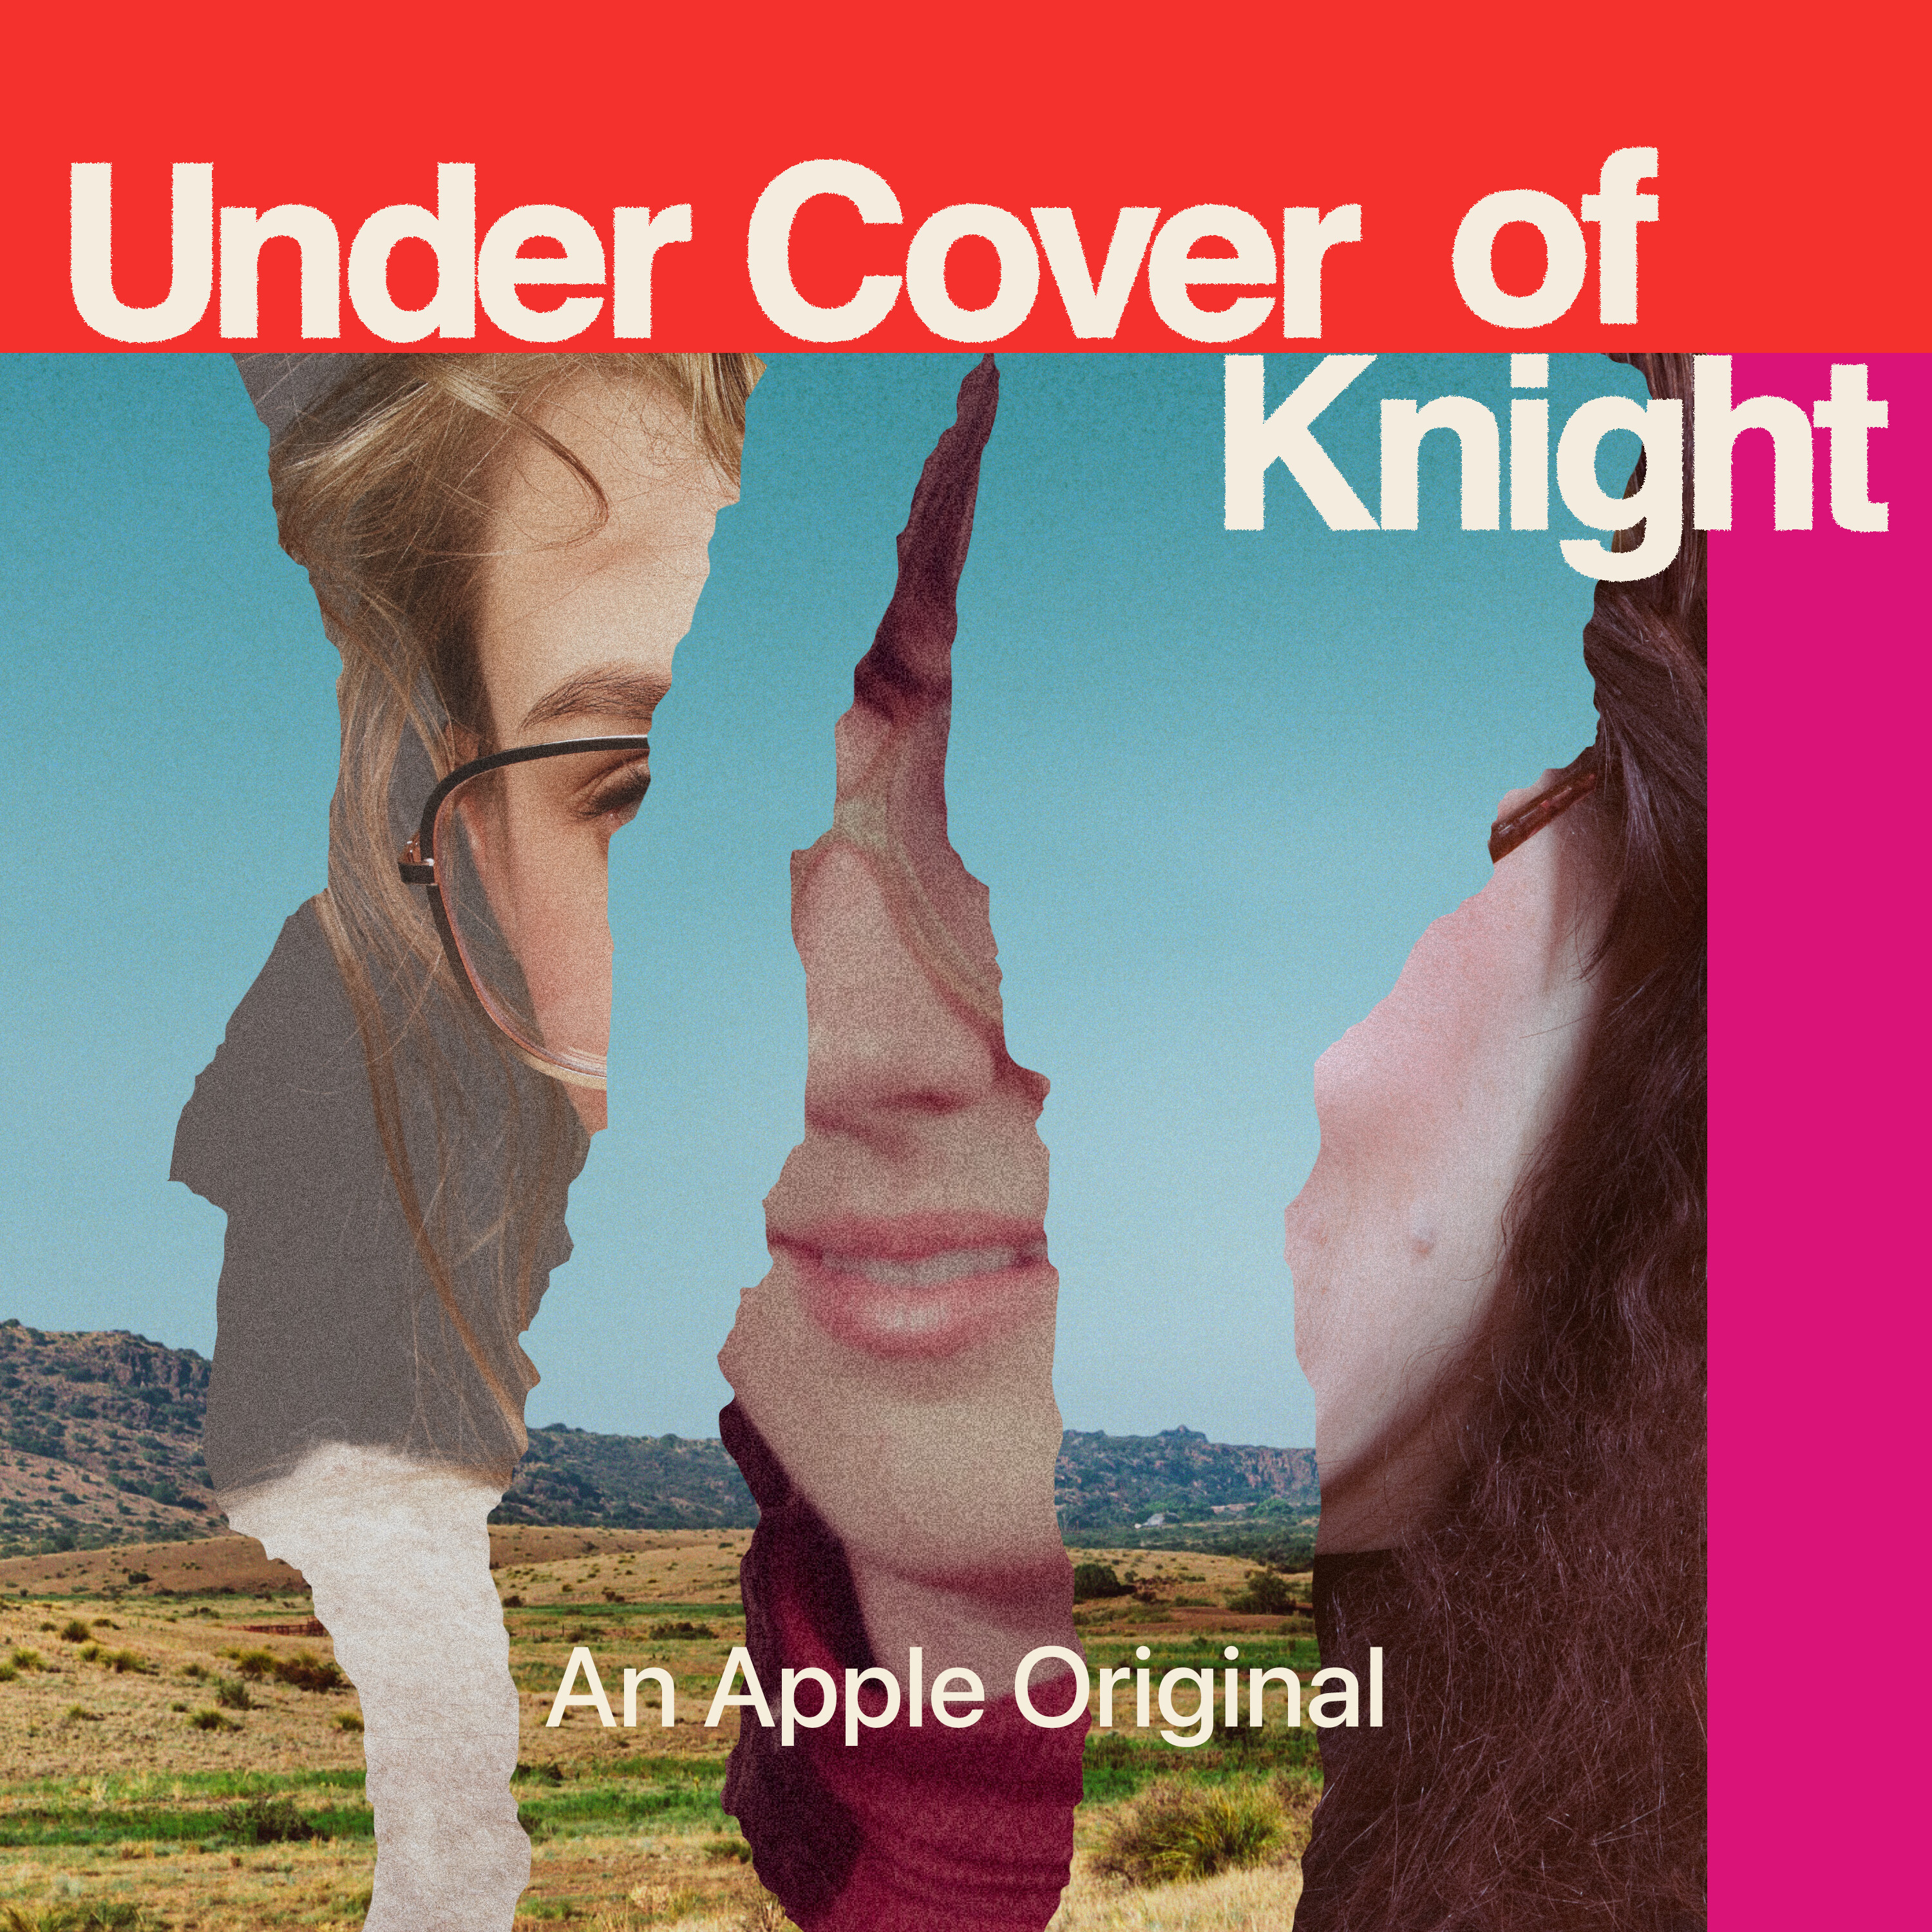 Under Cover of Knight podcast show image